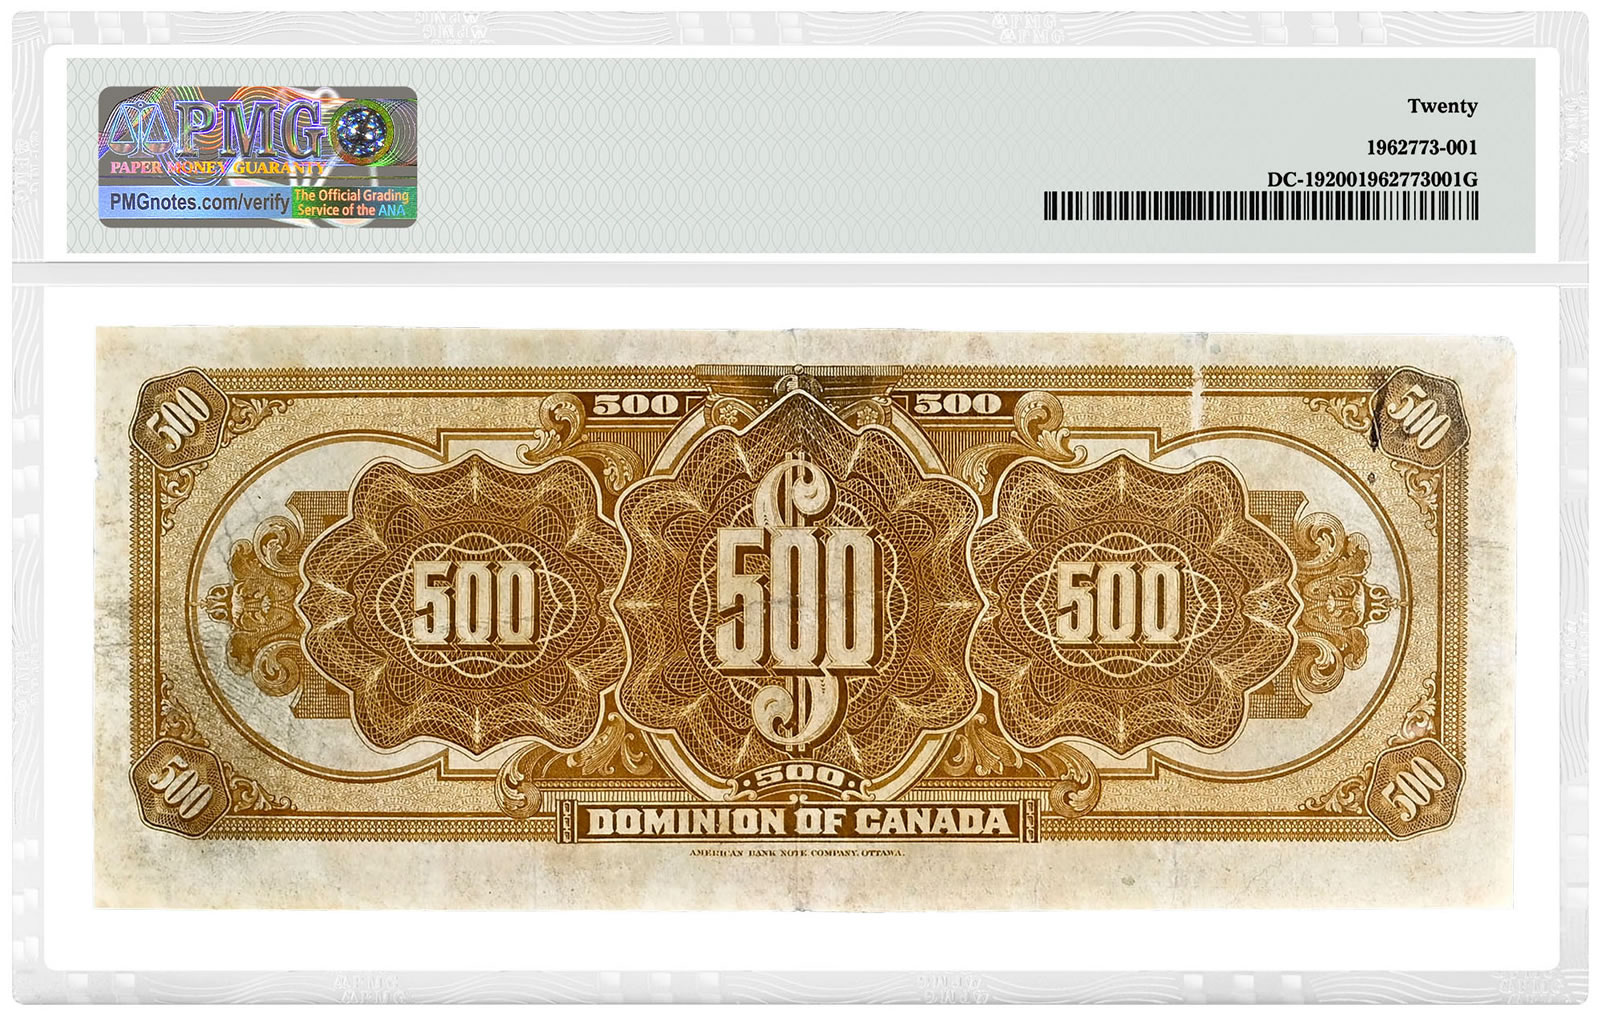 PMG Certifies Incredibly Rare Canadian 1911 $500 Banknote | CoinNews